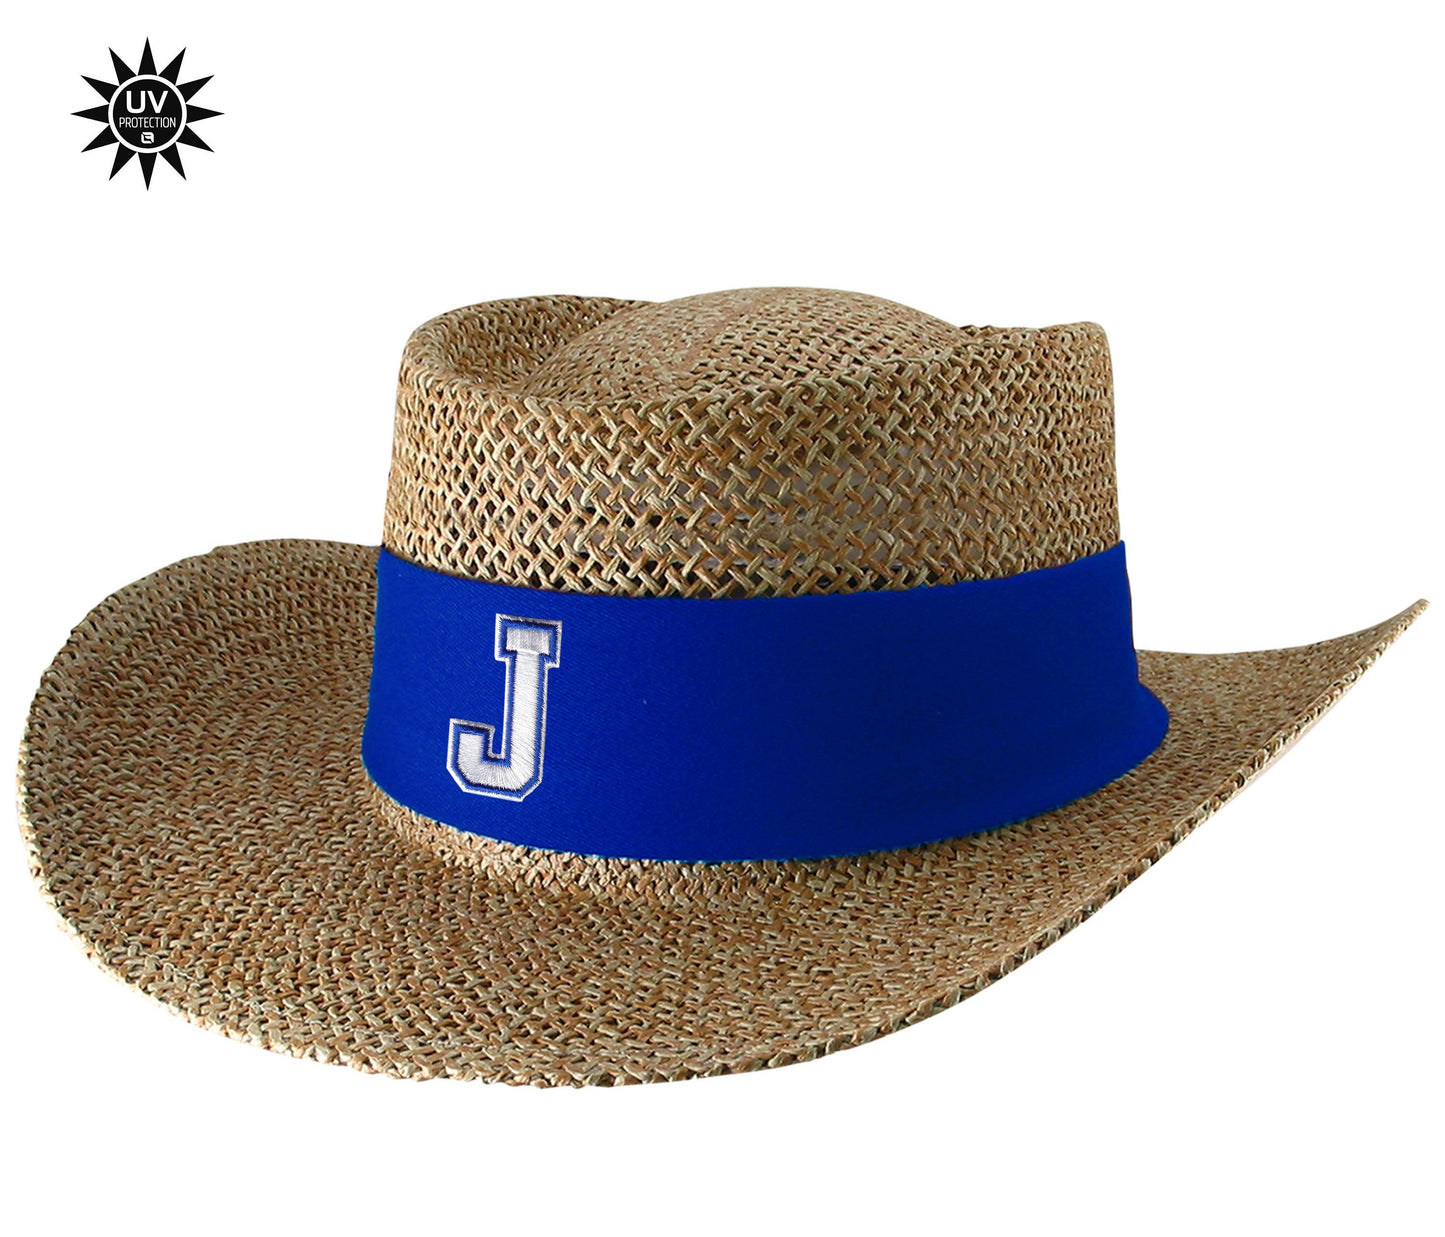 Logo Fit. UPF gambler hat with sunblock lining and flex-fit band. Natural color. One size fits most. Royal blue band with J logo.